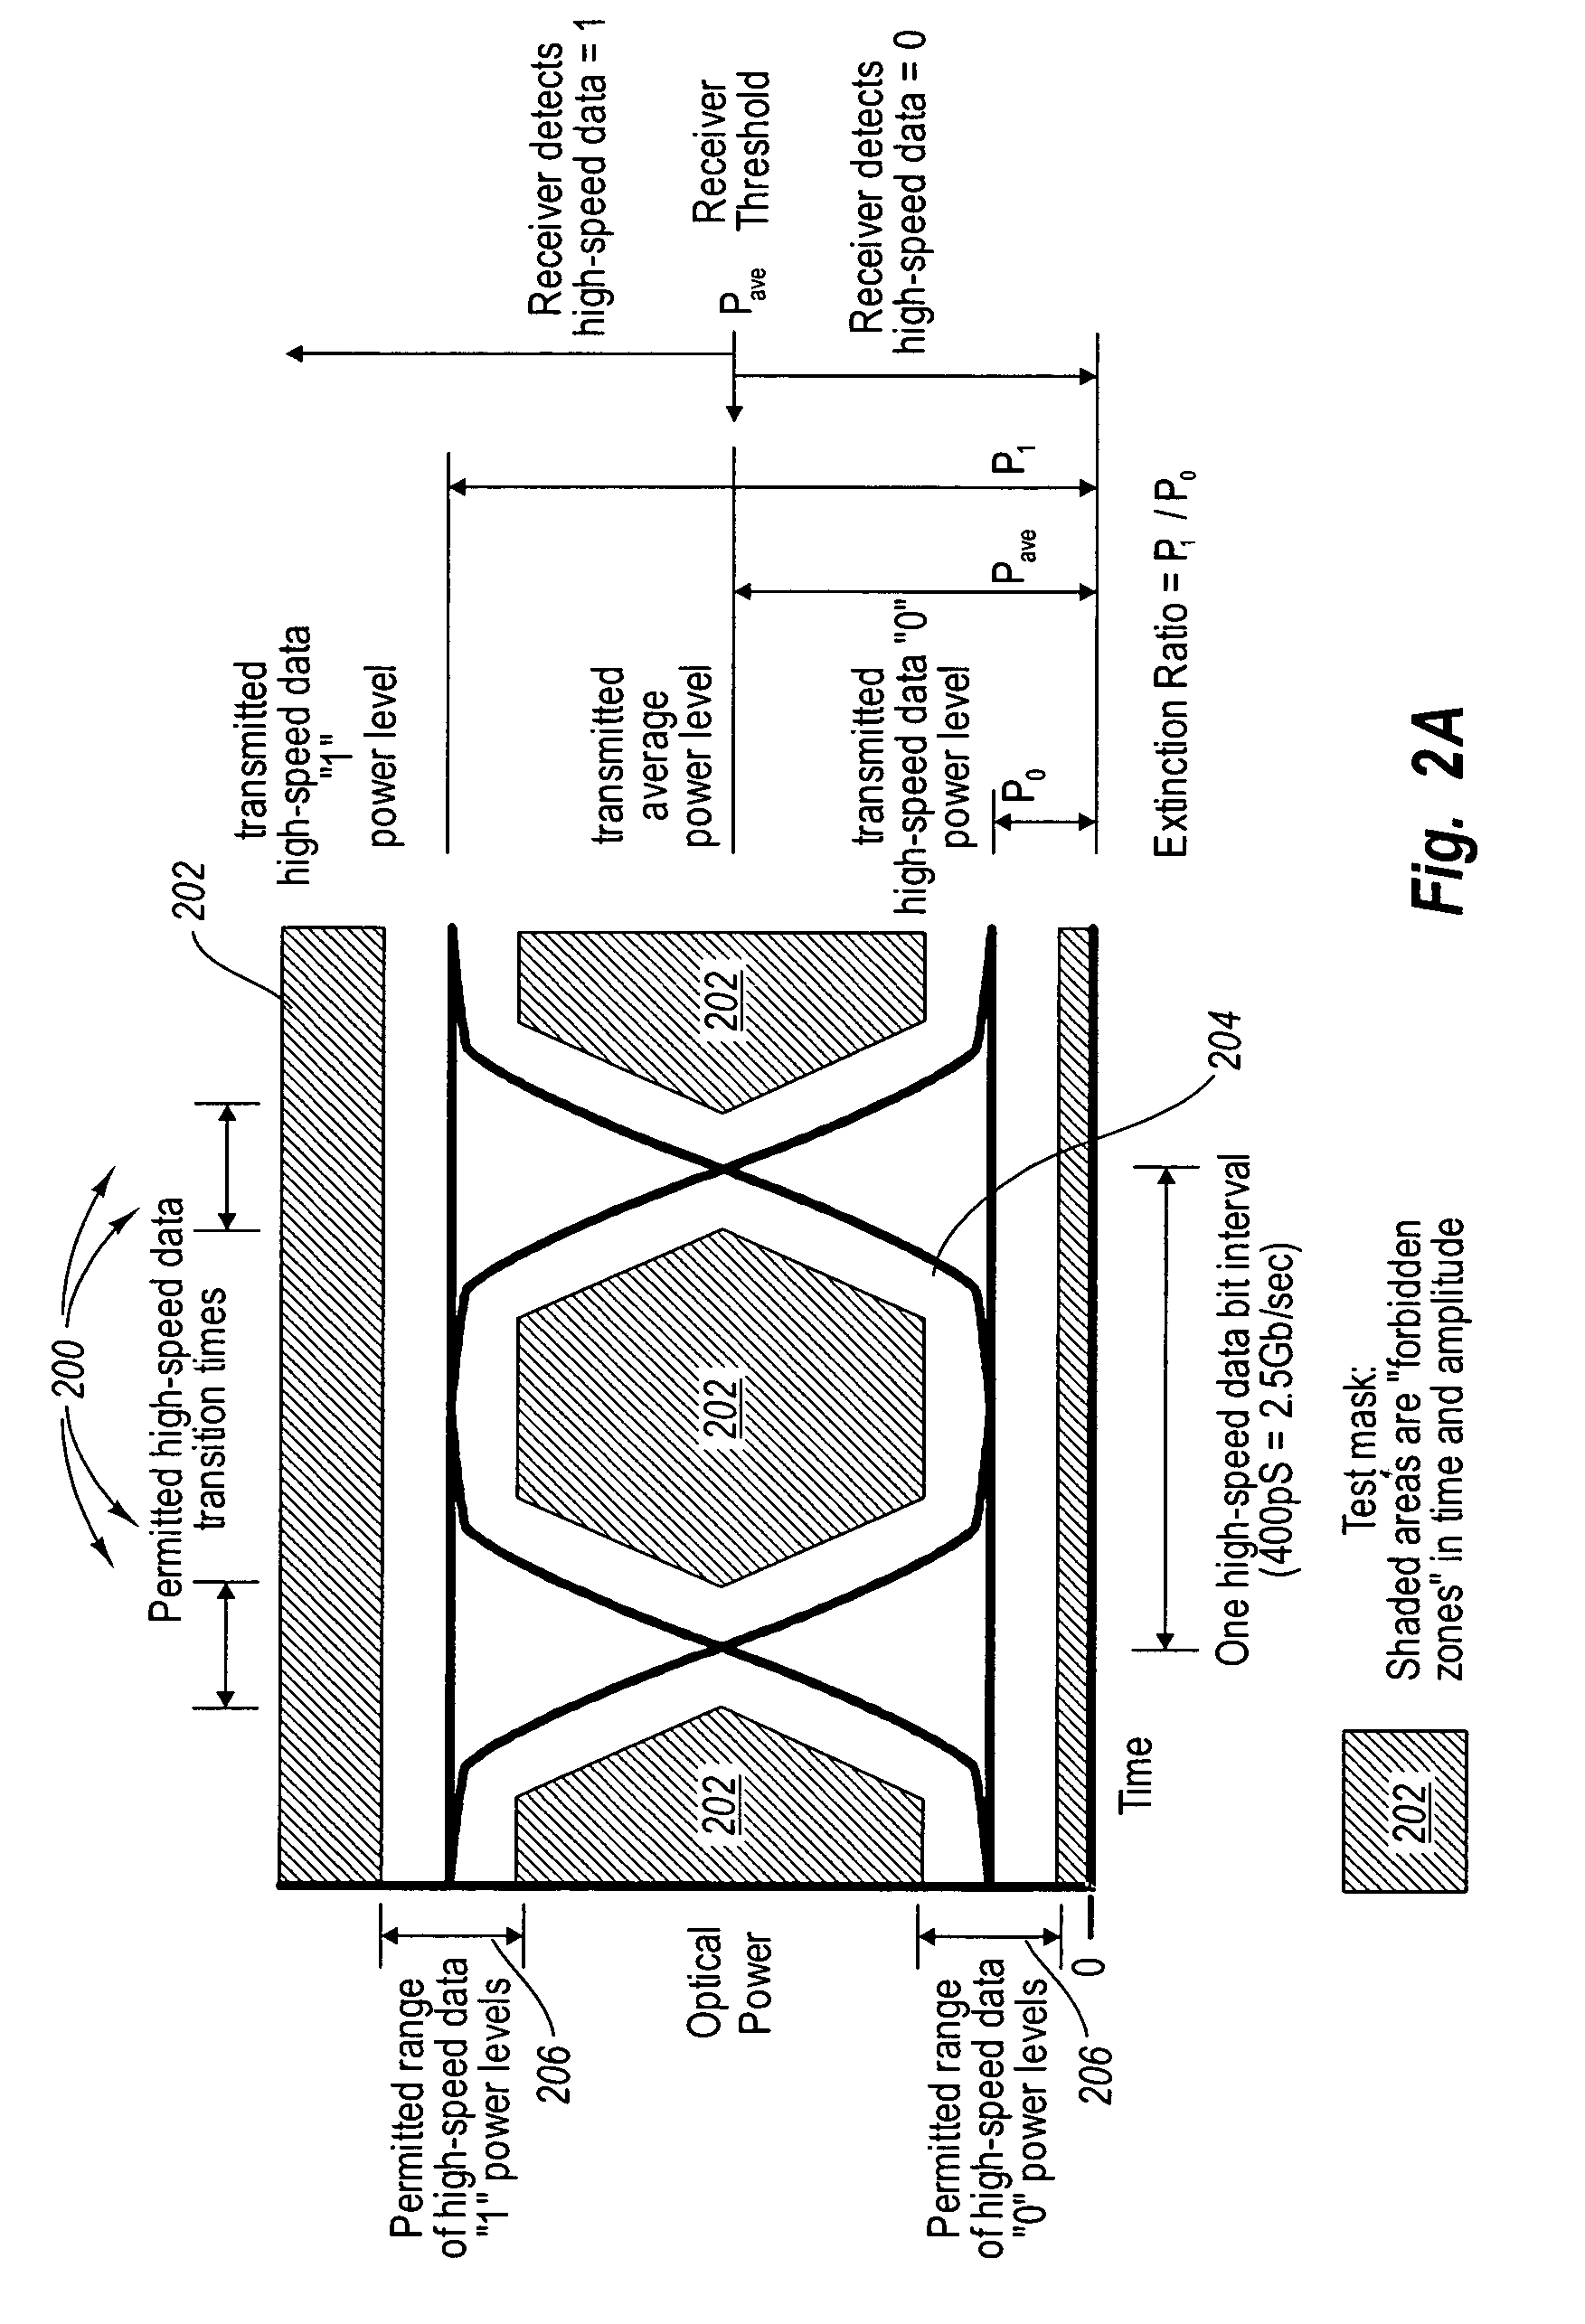 Out-of-band data communication between network transceivers